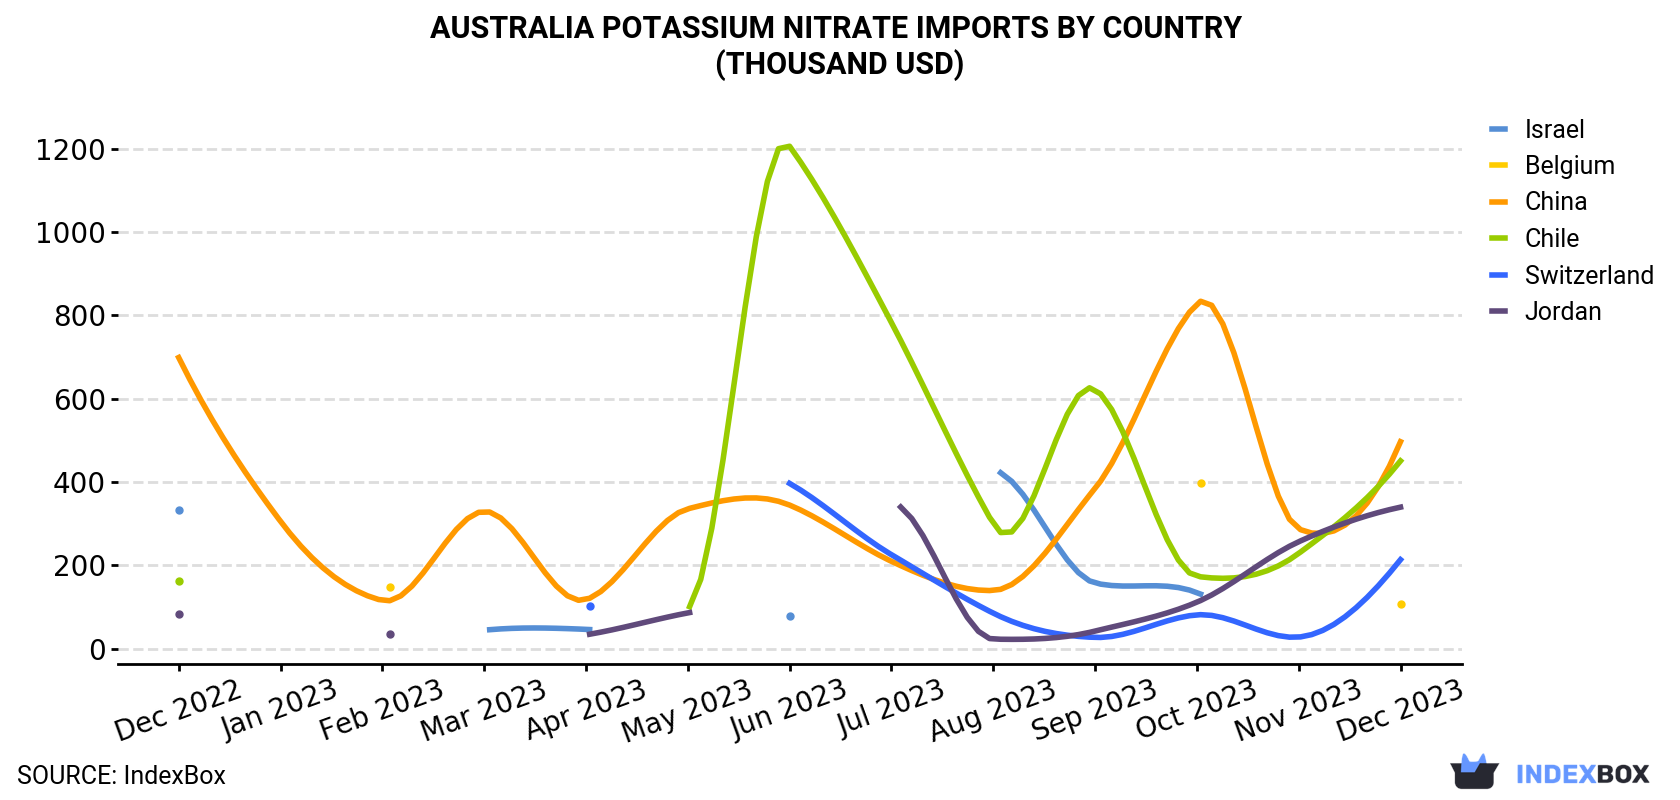 Australia Potassium Nitrate Imports By Country (Thousand USD)